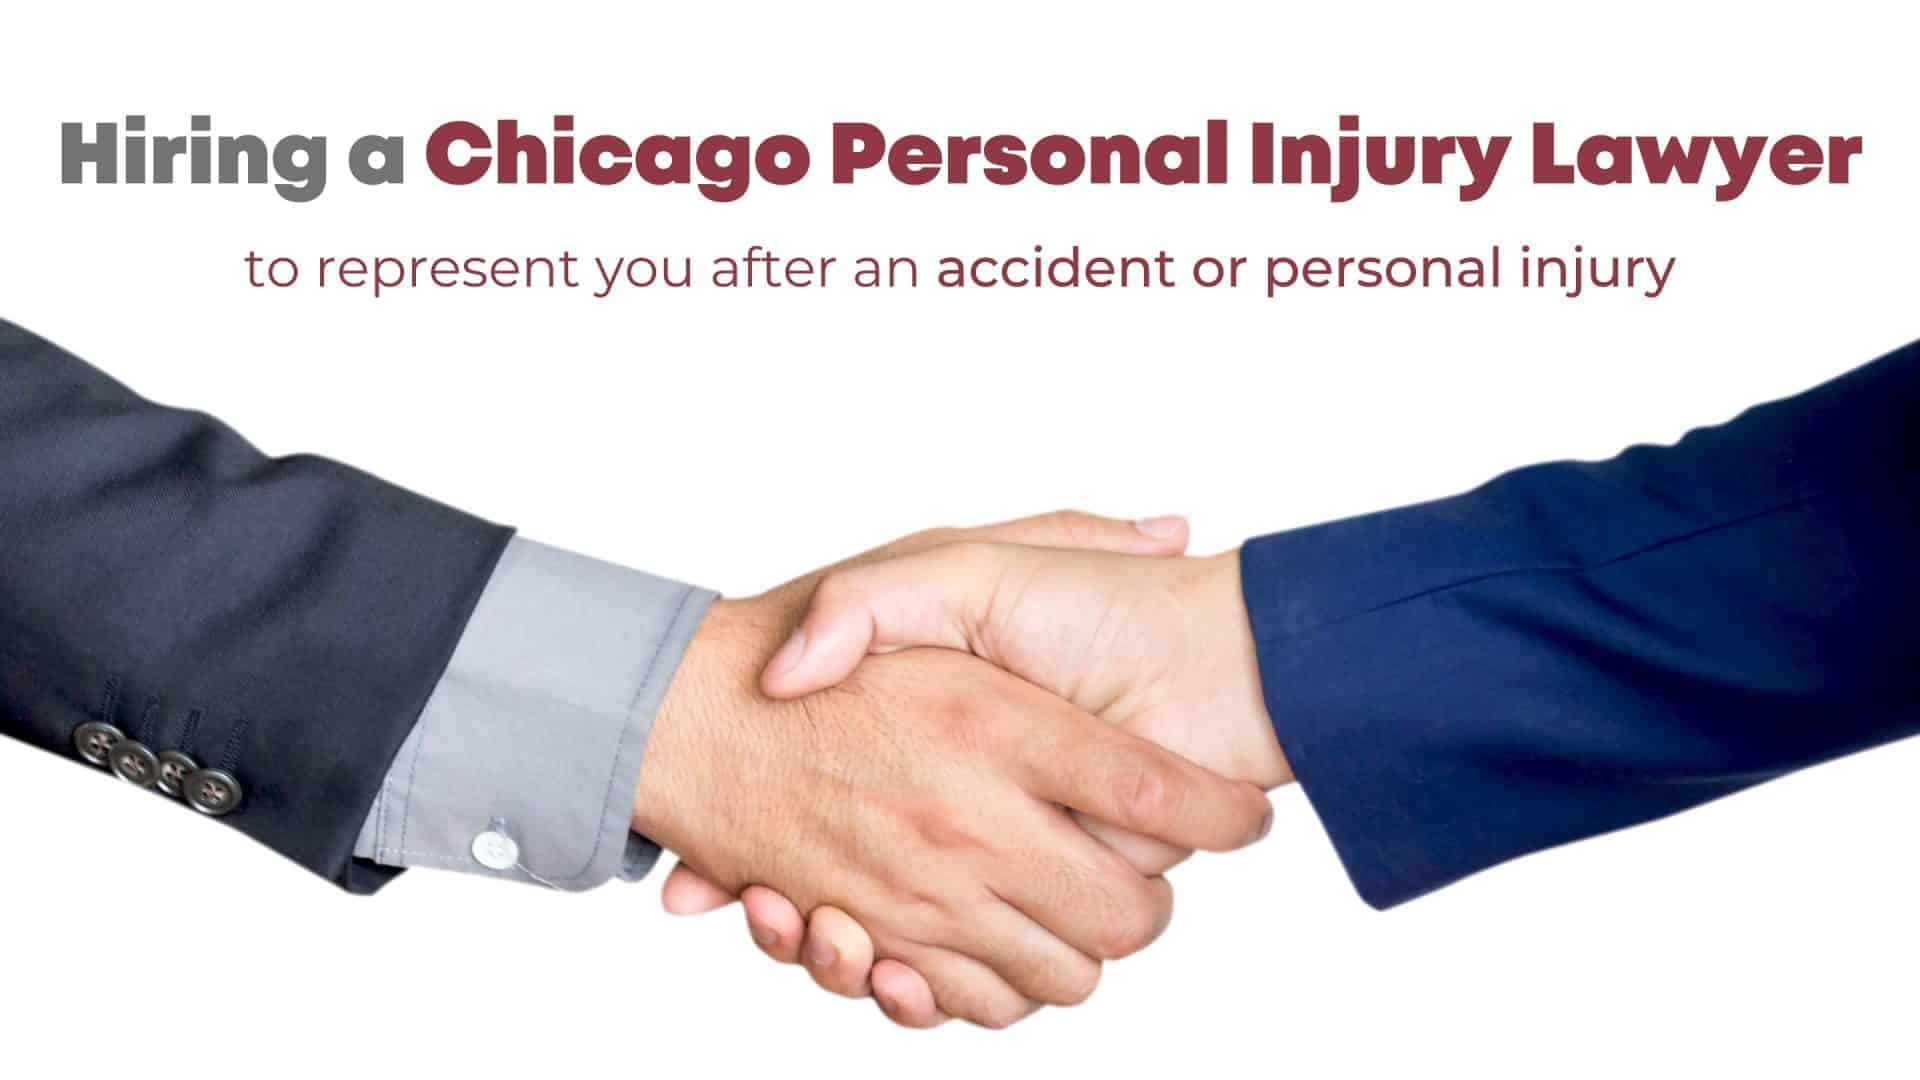 Why Hire A Chicago Personal Injury Lawyer? | Chicago Personal Injury Lawyers | TorHoerman Law